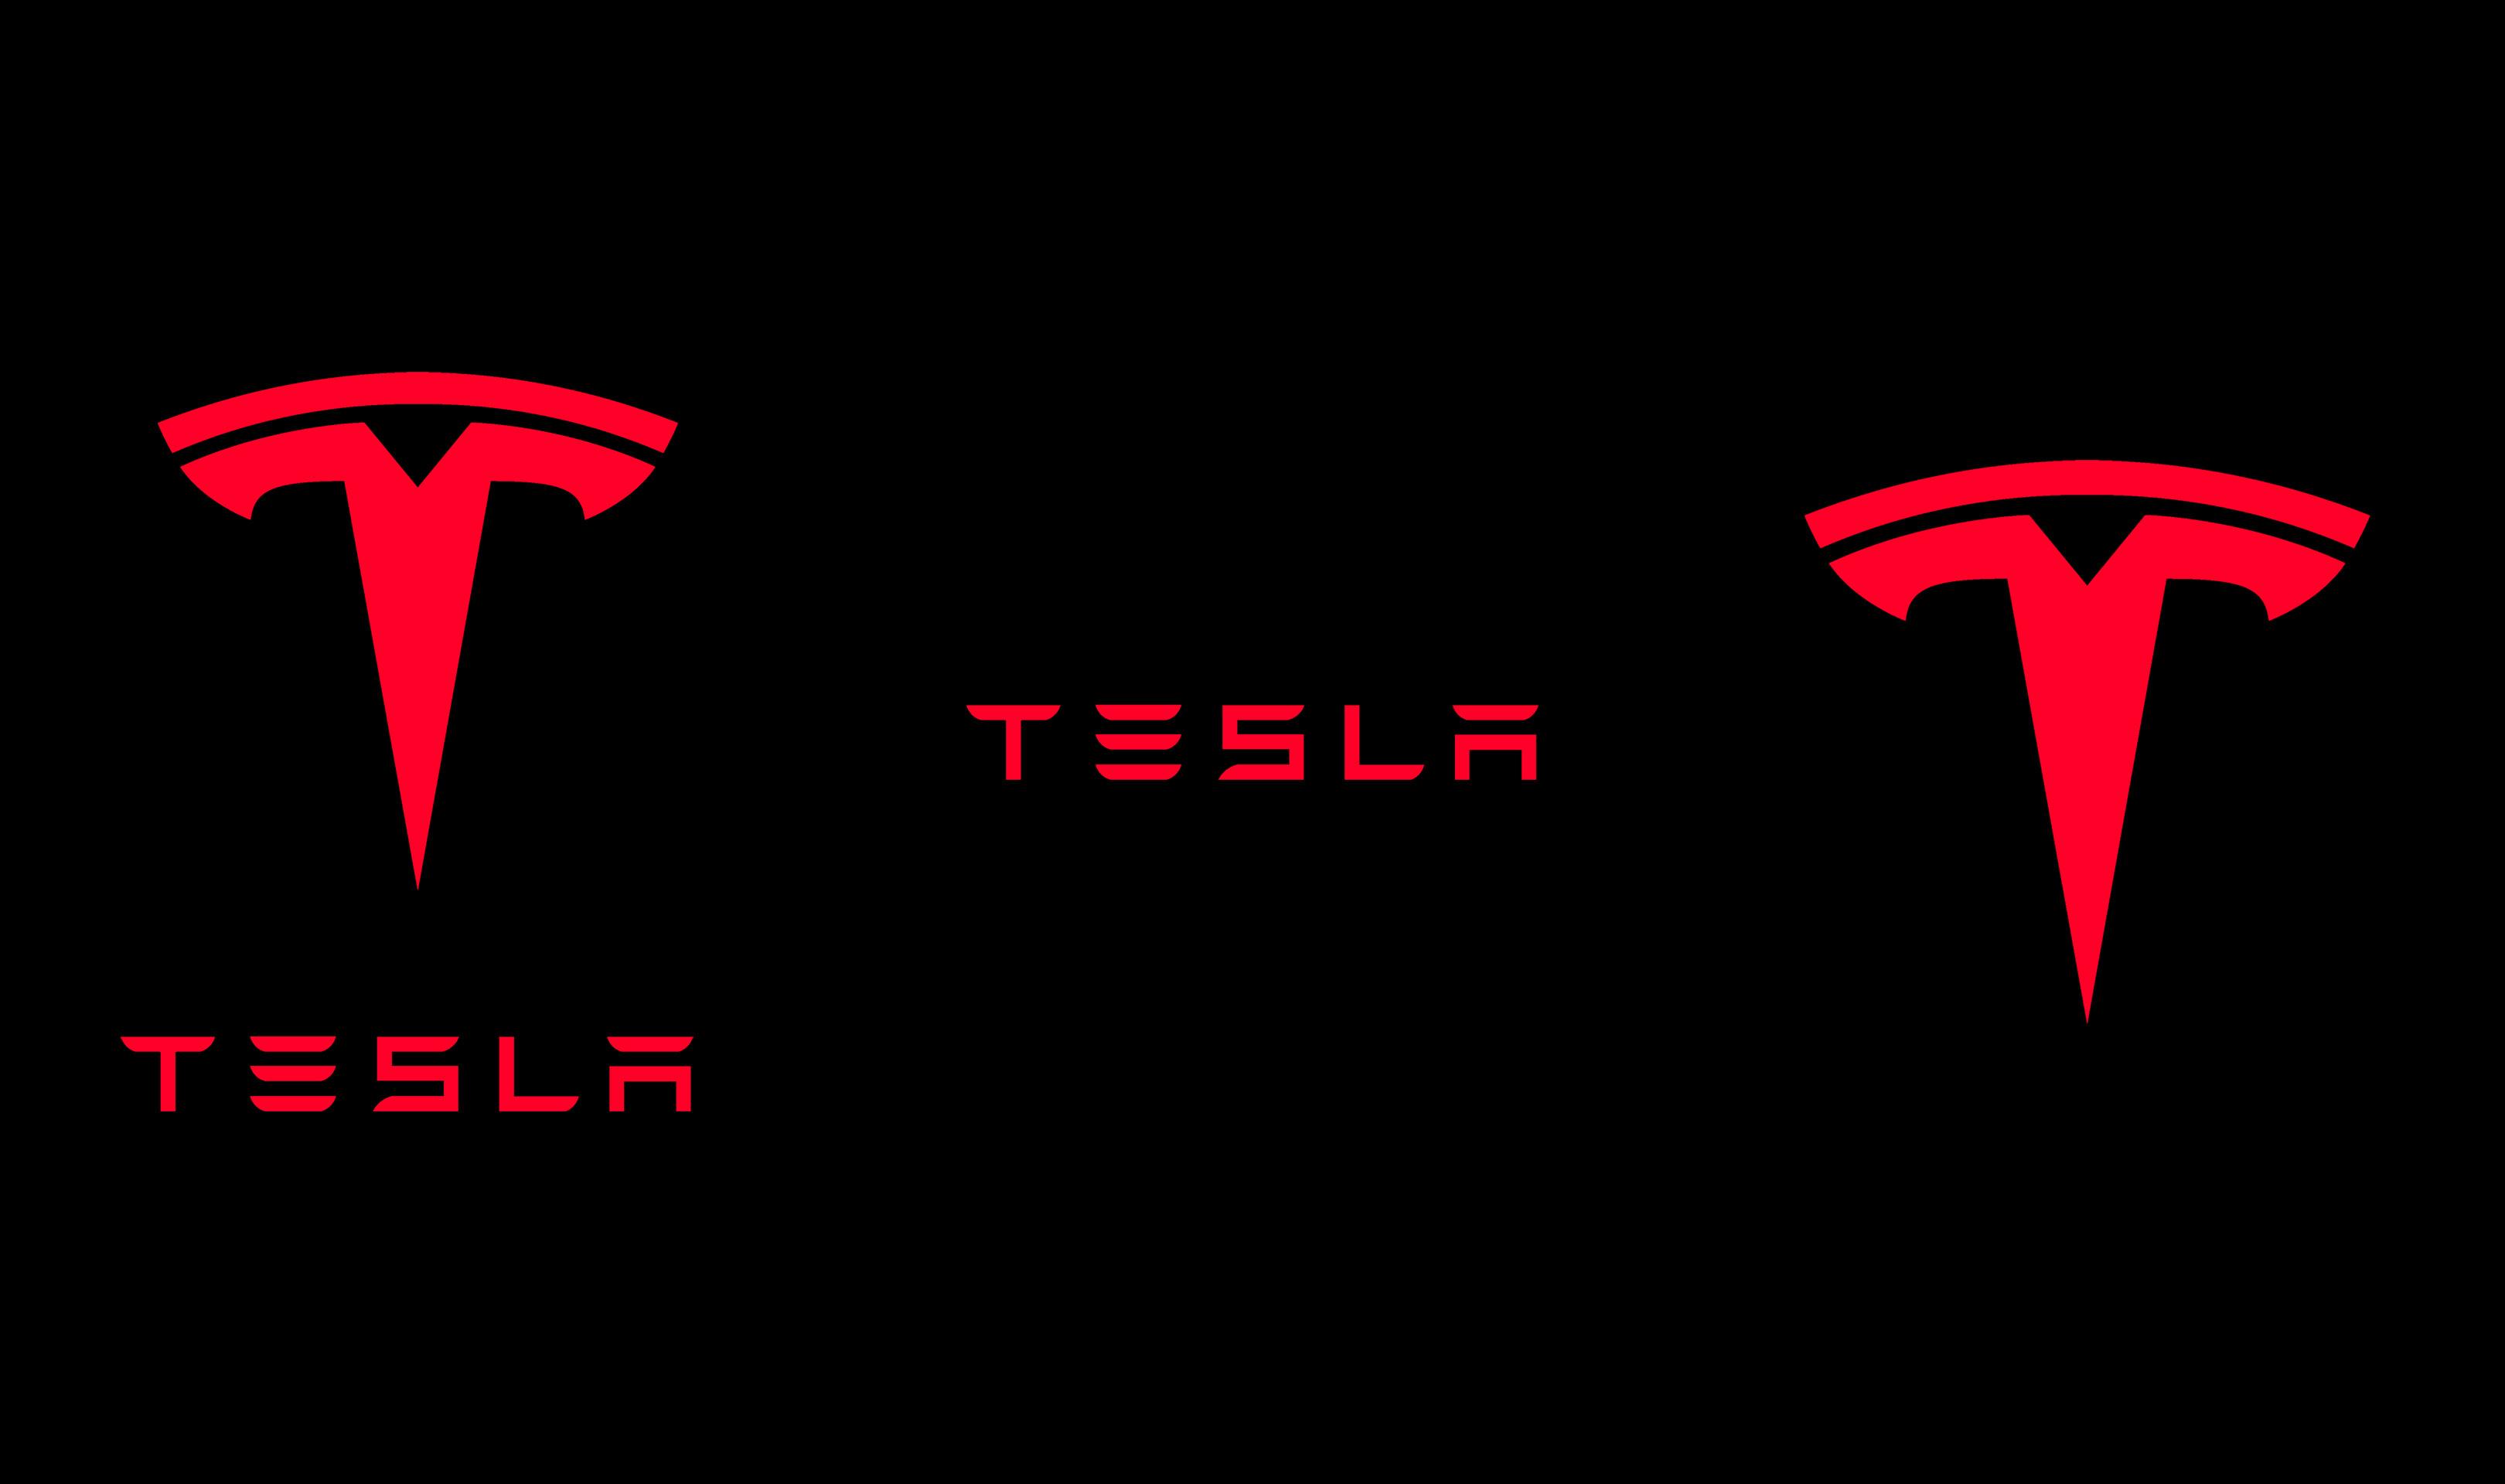 Tesla Red Logo - Tesla Logos [FHD & QHD] Link in comments